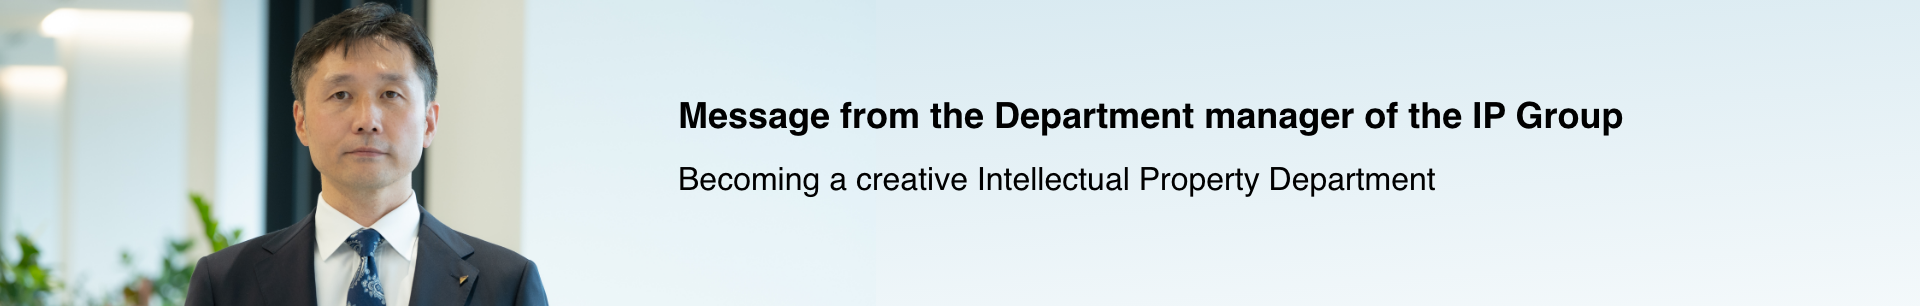 Message from the Department manager of the IP Group 「Becoming a creative Intellectual Property Department」